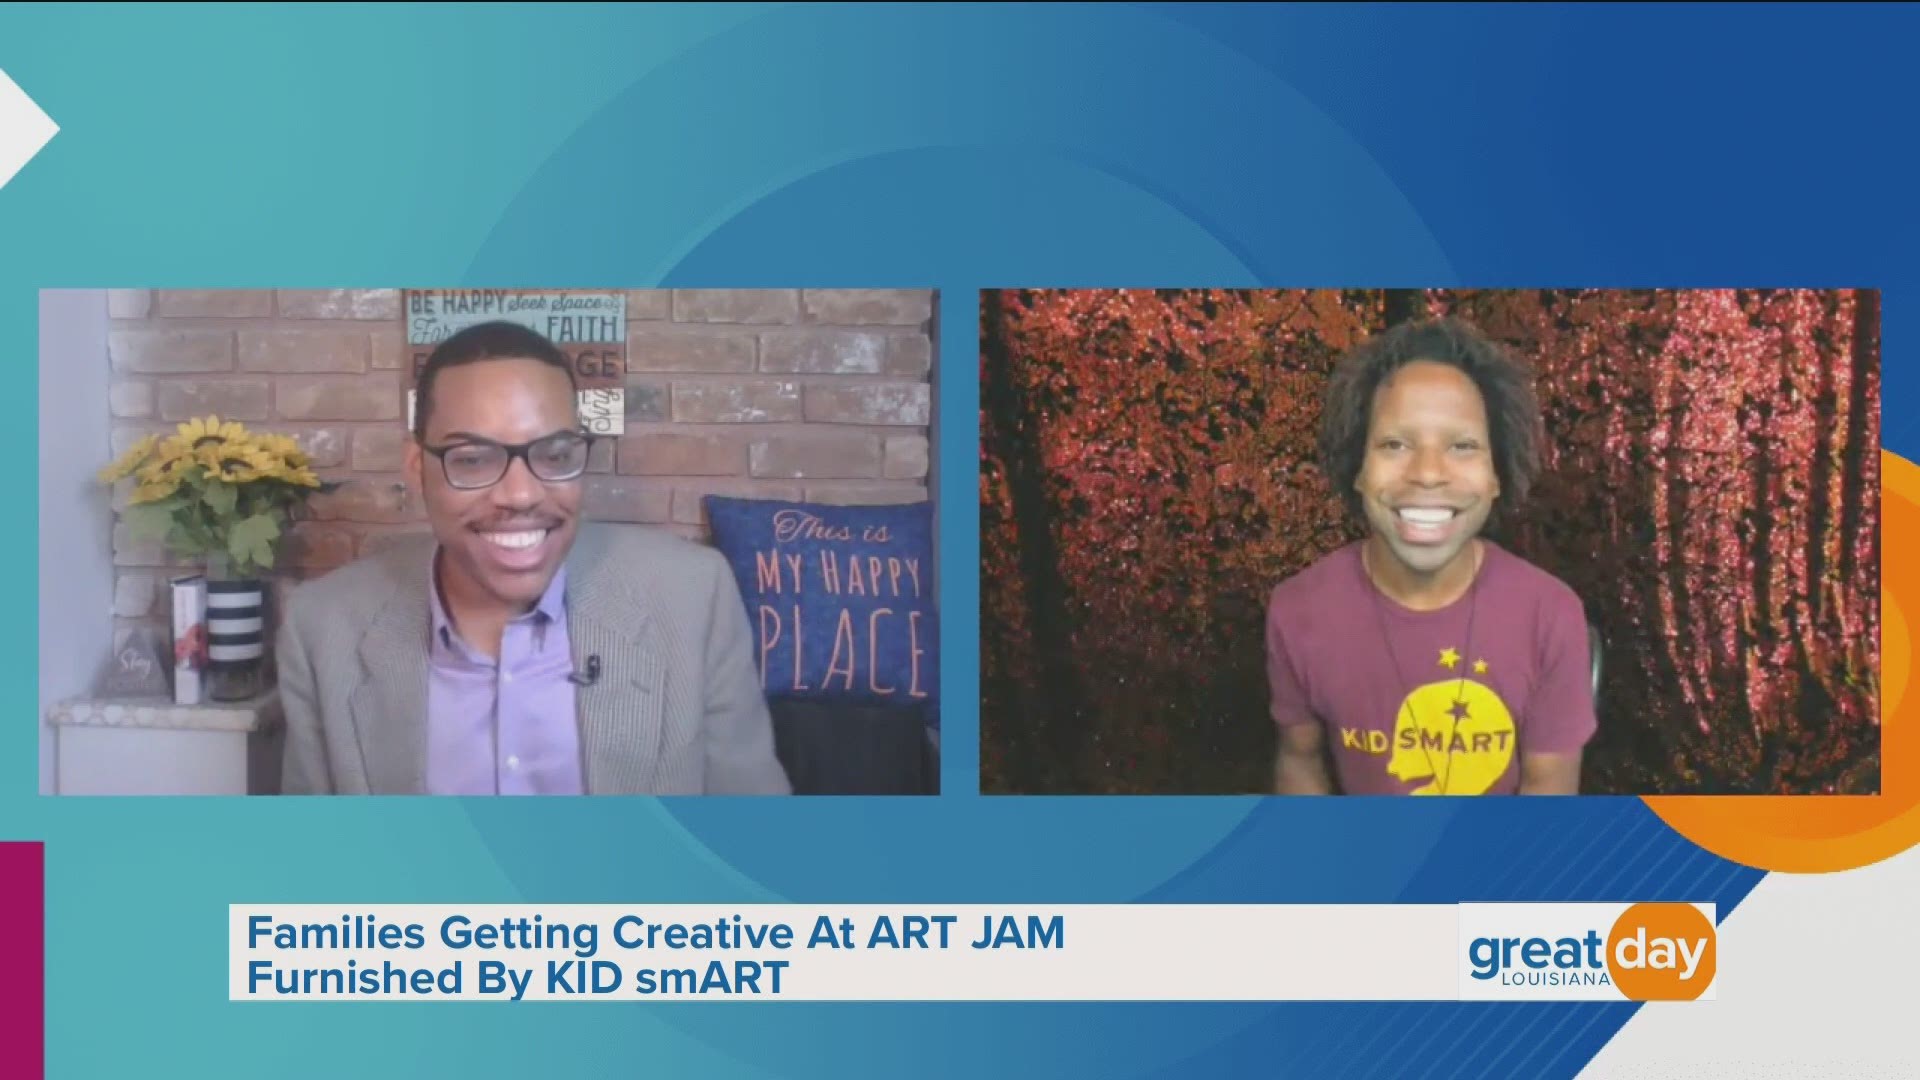 Kid smART discussed their upcoming 'ART JAM' and shared two fun activities parents and children can make together.